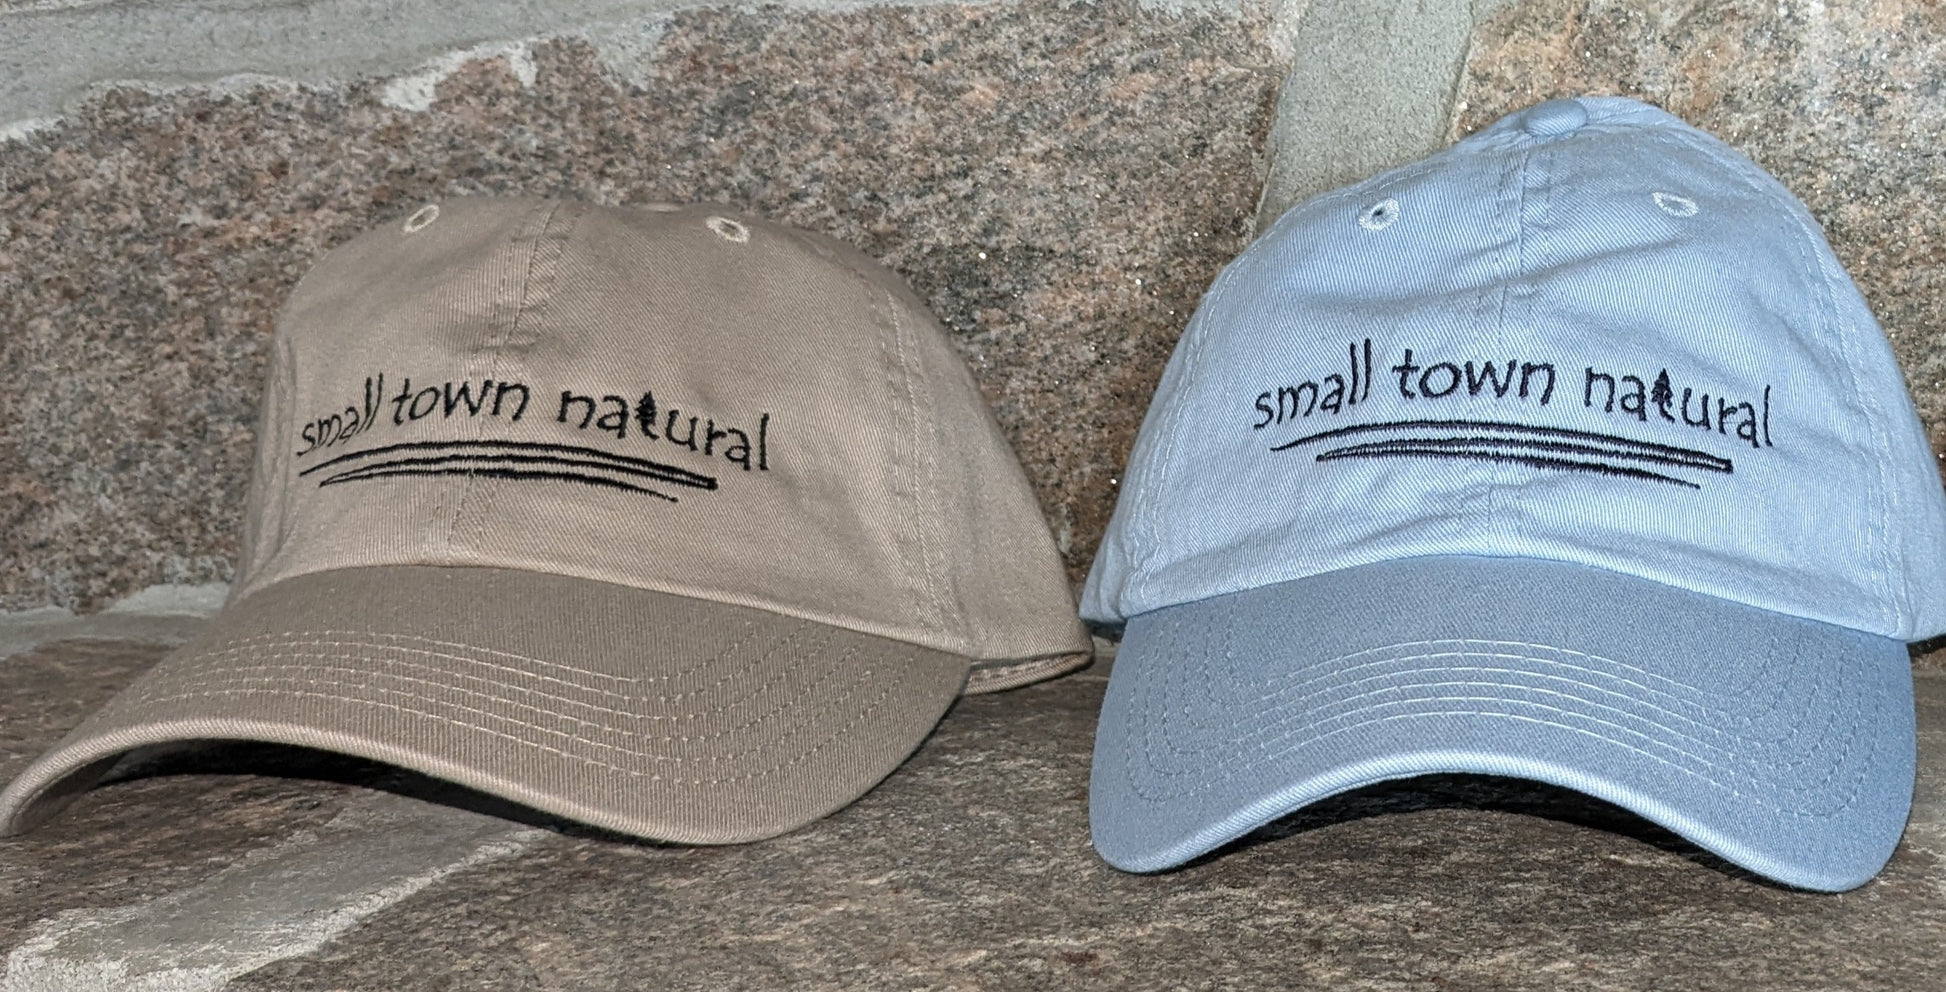 Hat 100% Cotton Small Town Natural  ('t' in natural is a tree embroidered graphic of same height as text) is embroidered in plain hand-printed text/font on front of your choice of sand or baby blue hathat in black thread (on black hat thread is light grey) with a thin zigzag line under text representing winding river / creek)